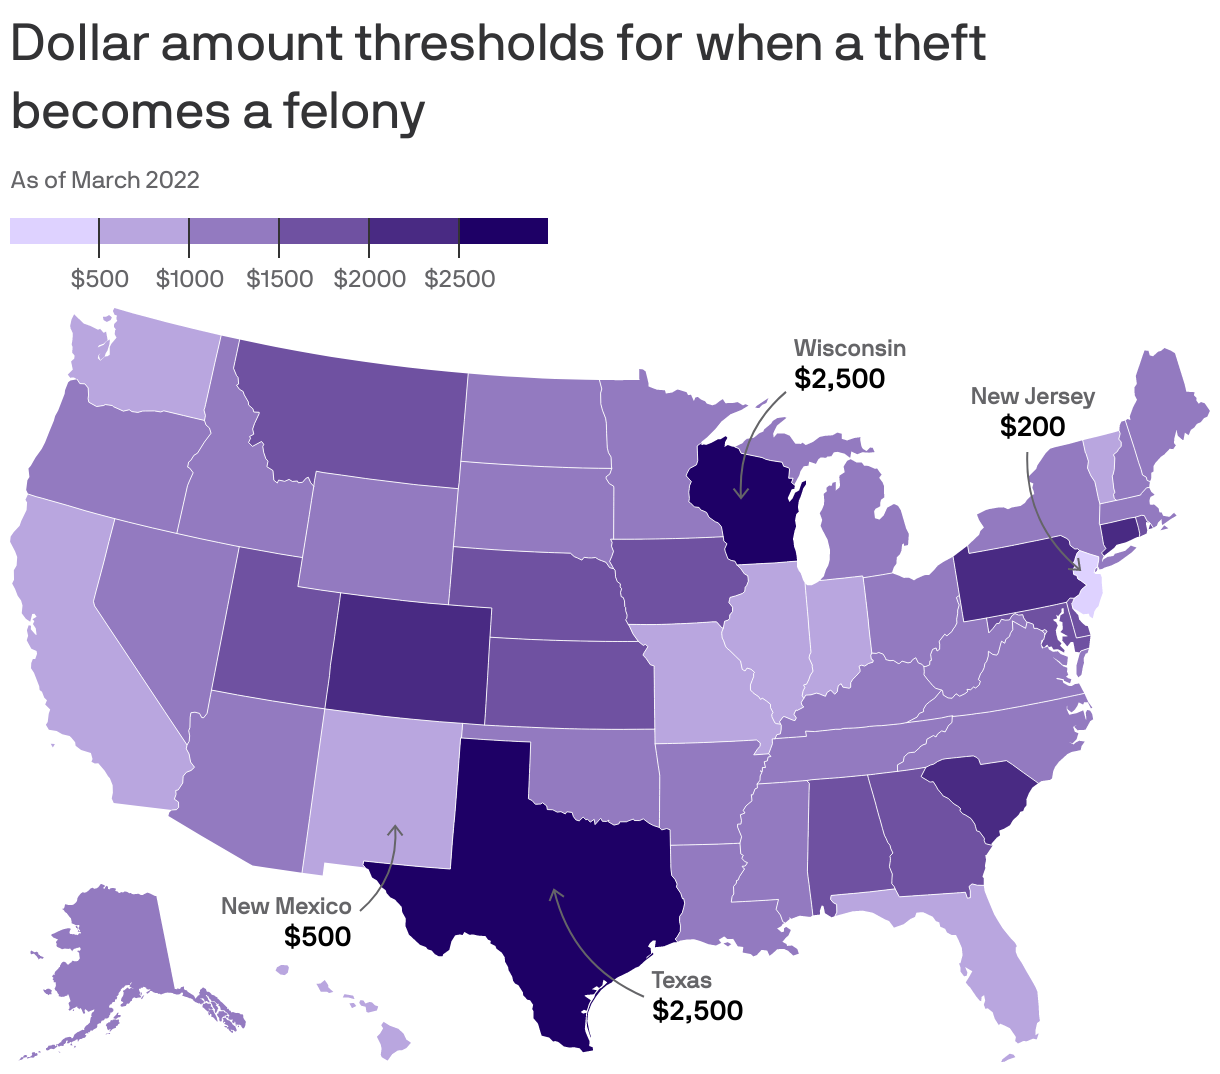 Dollar amount thresholds for when a theft becomes a felony